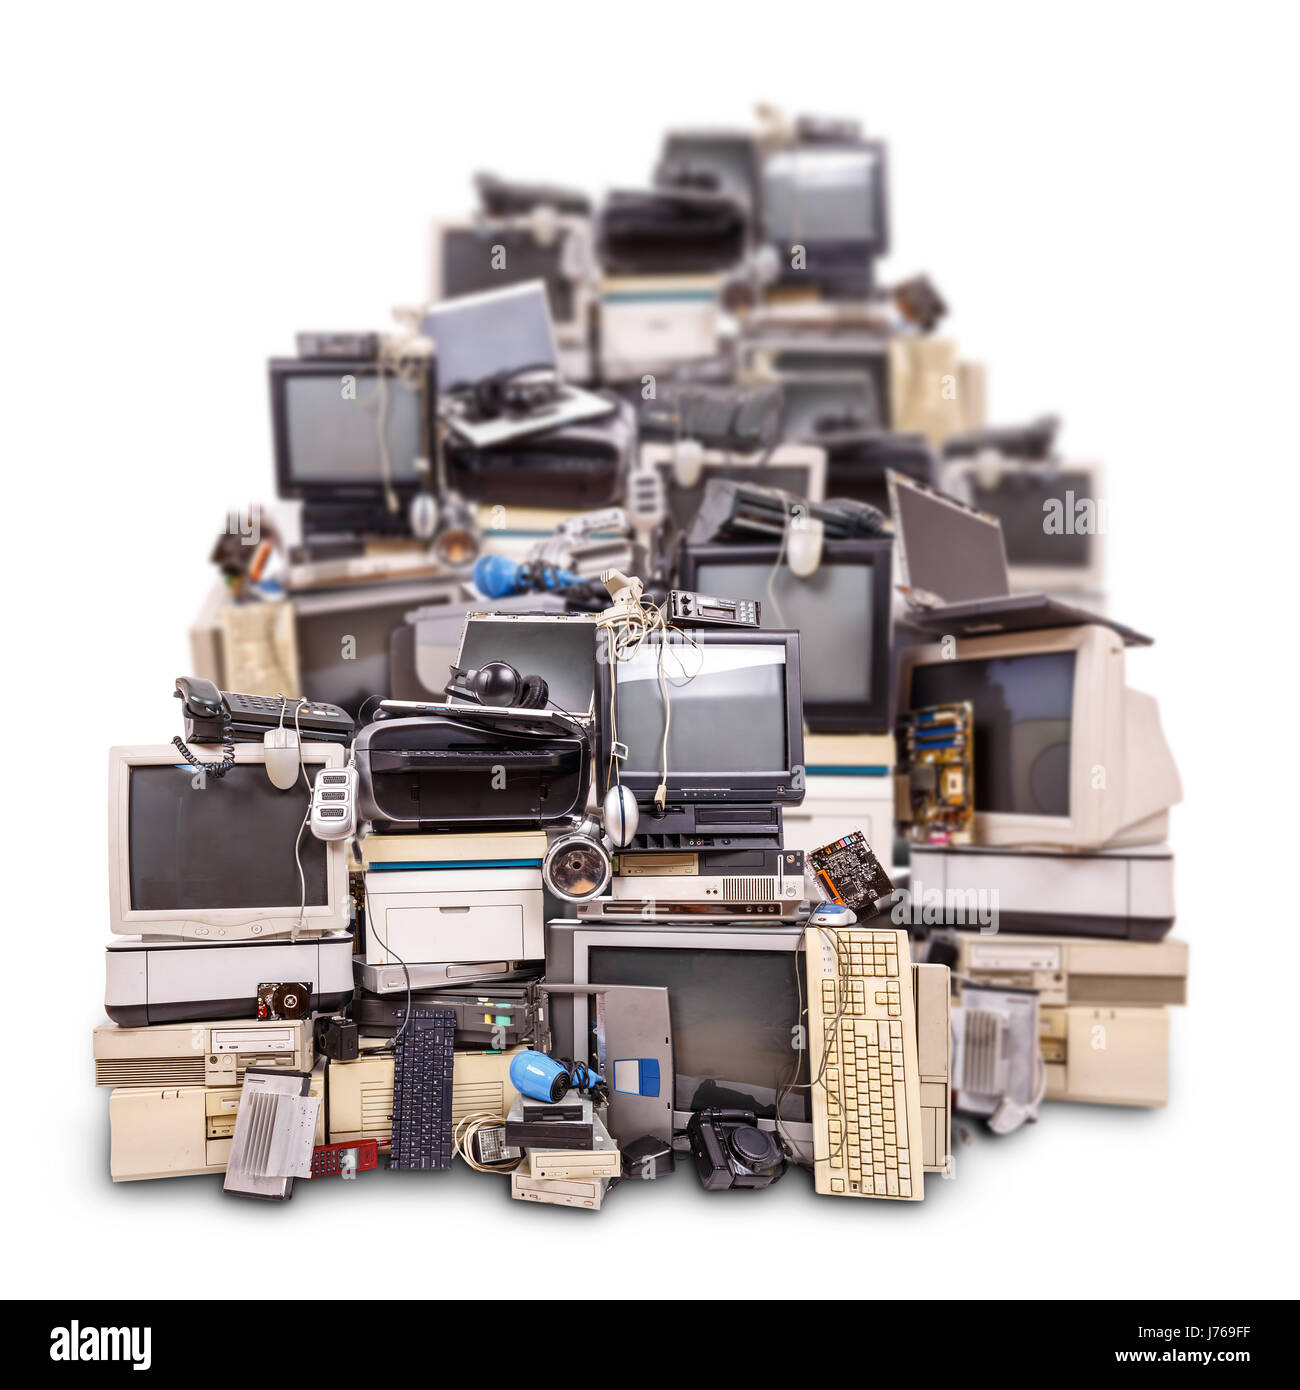 Electronic waste ready for recycling isolated on white background Stock Photo